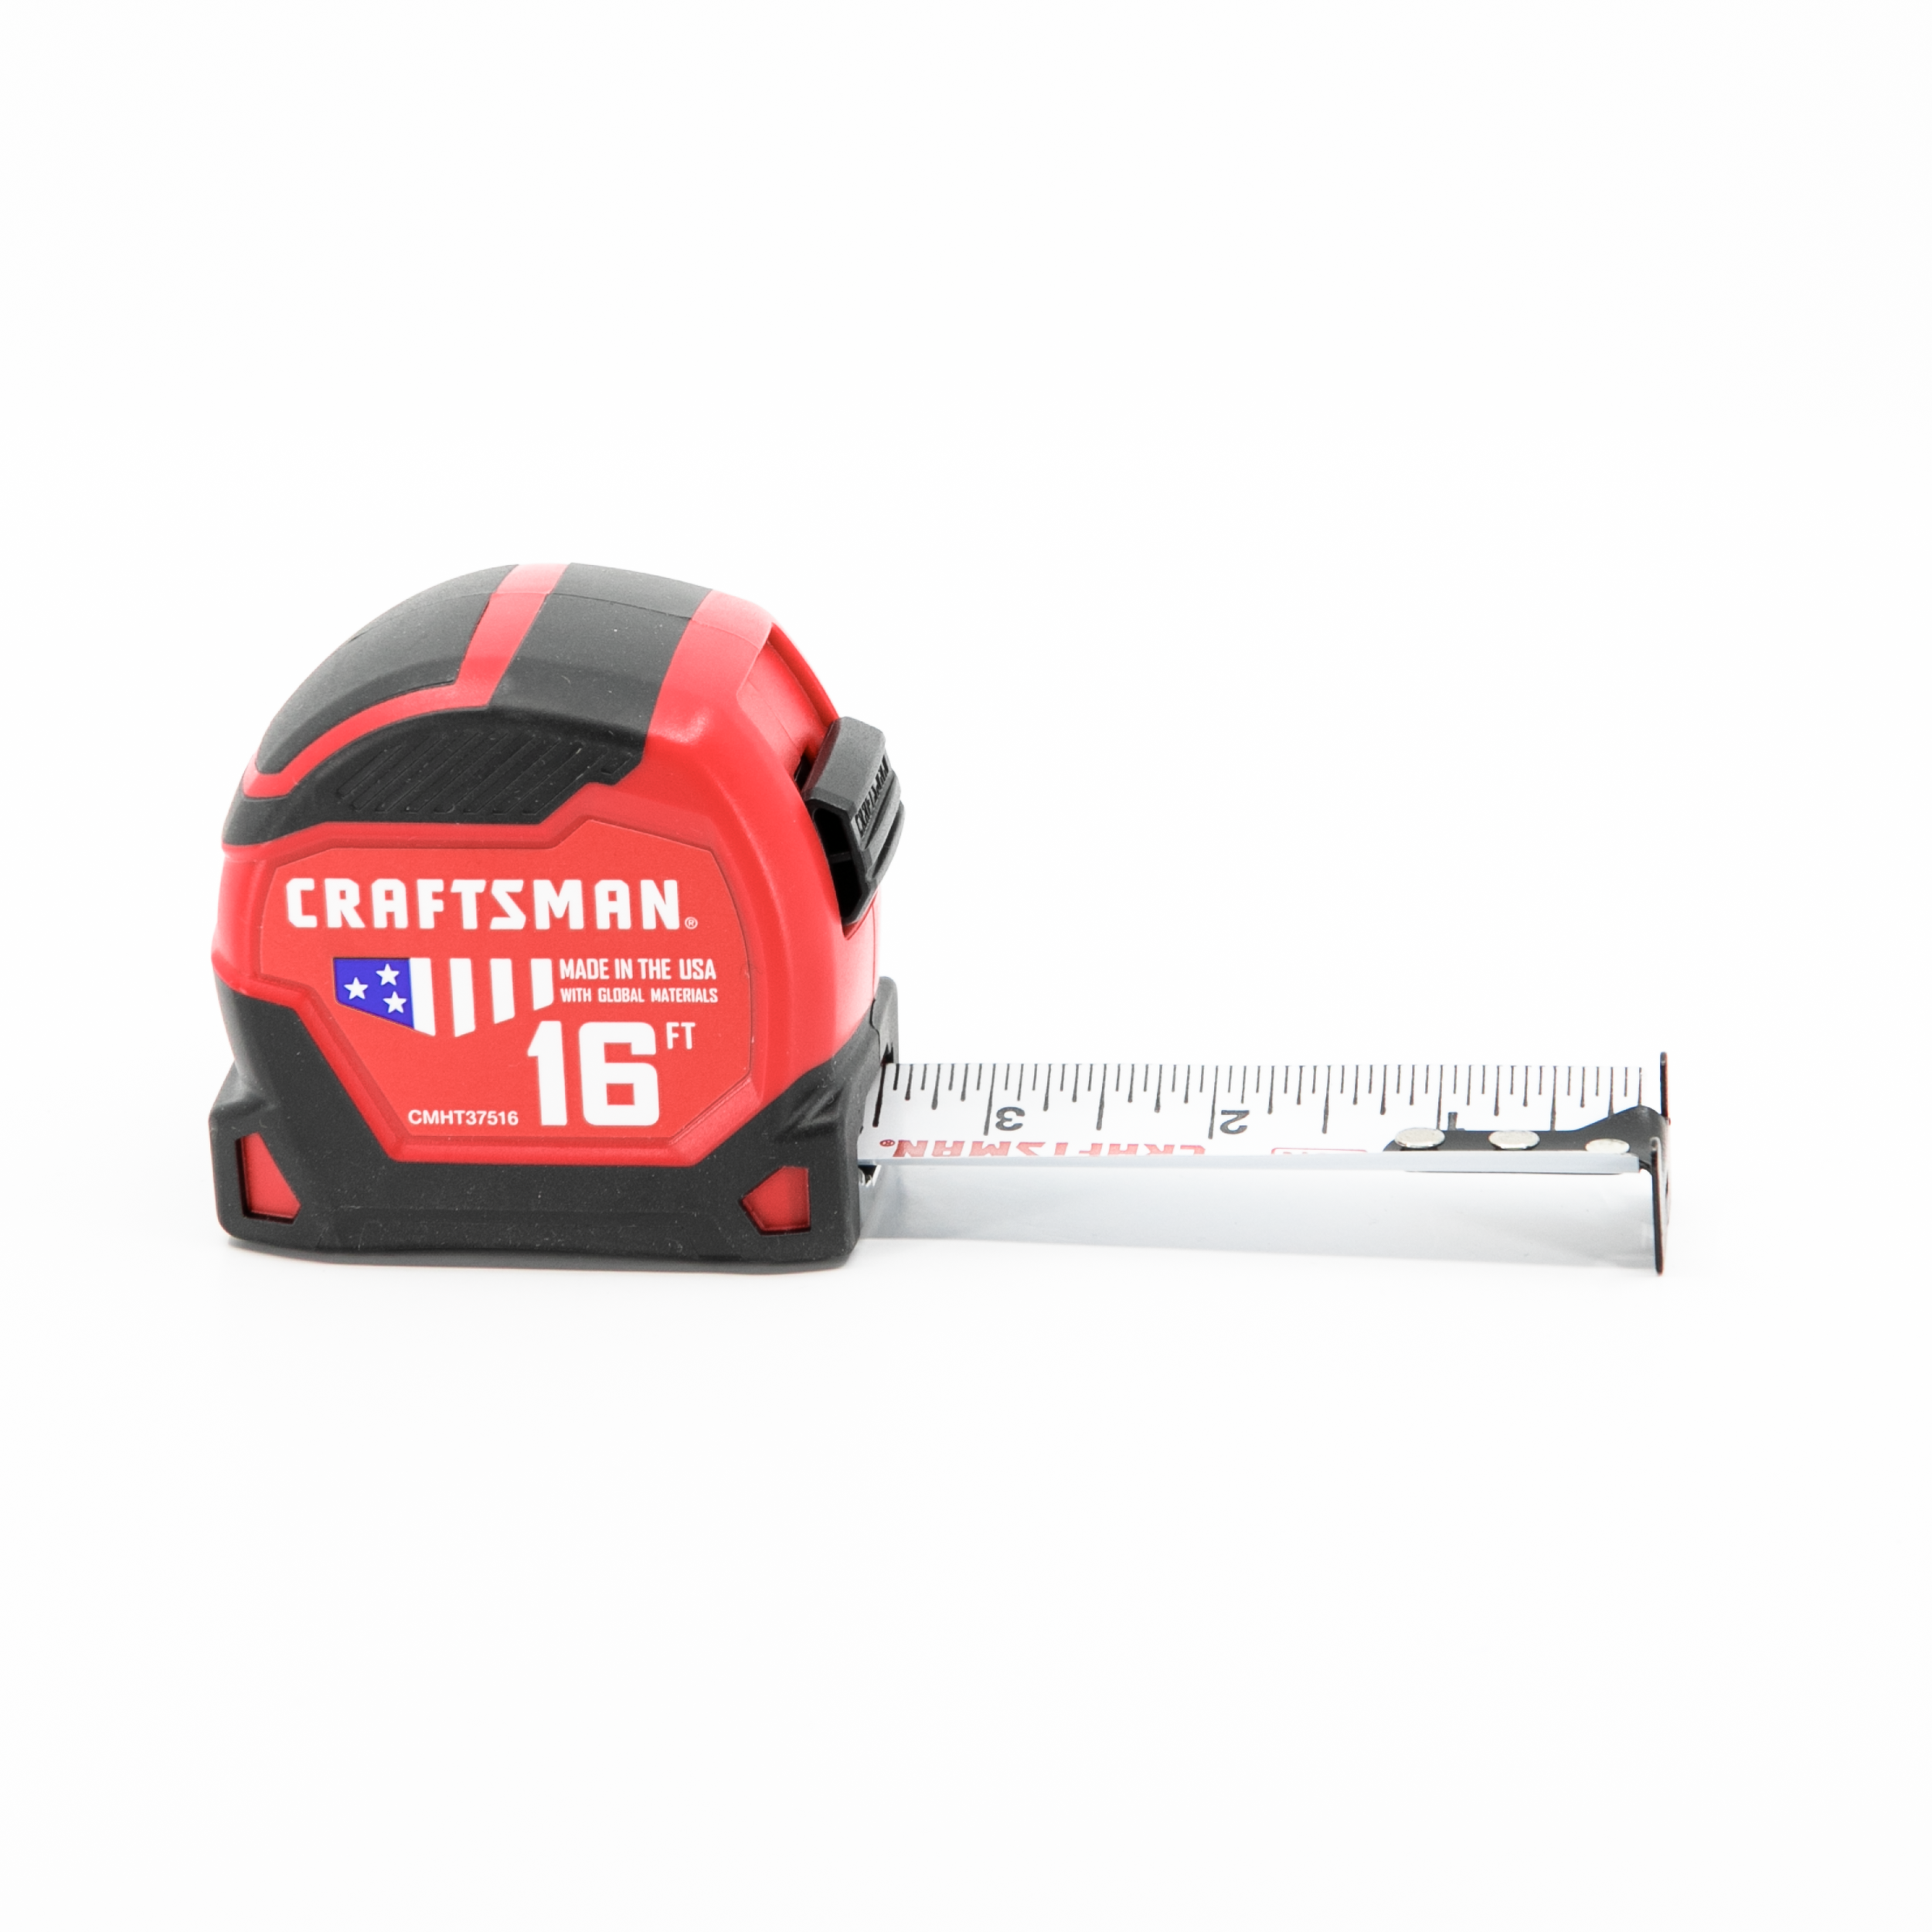 24 Pieces Measuring Tape16ft X .75in - Tape Measures and Measuring